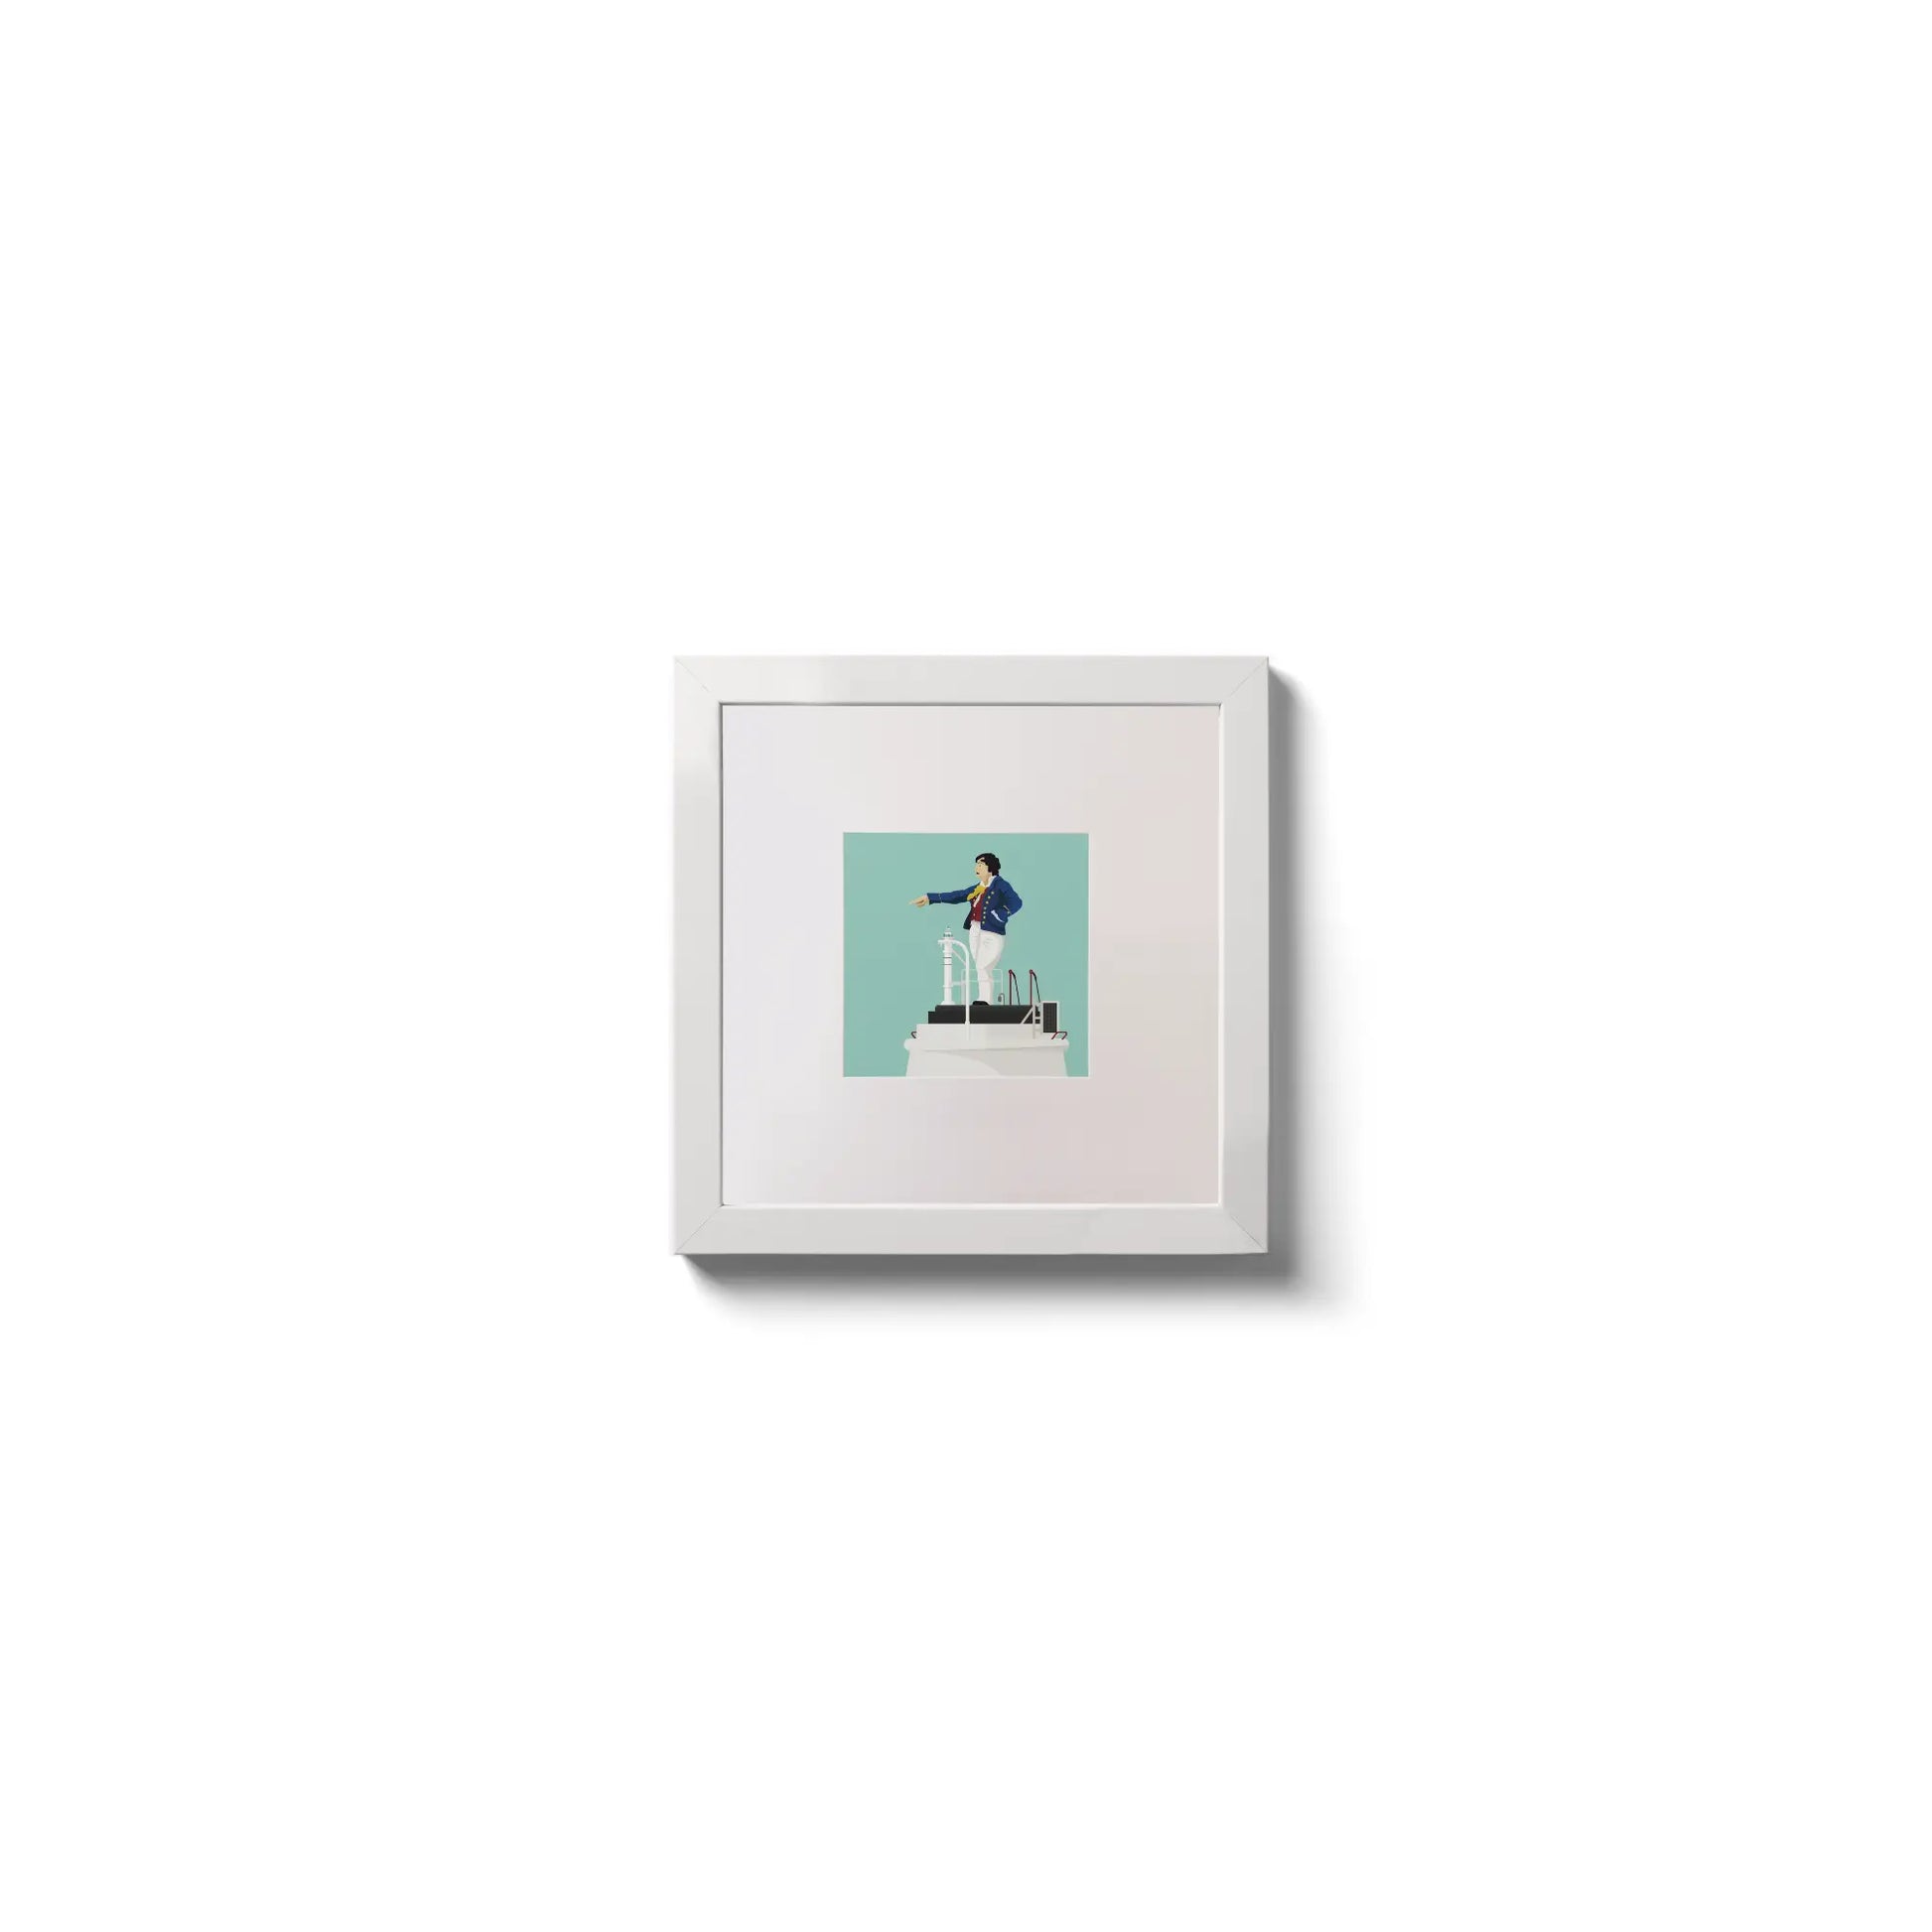 Illustration of Metal Man lighthouse on an ocean green background,  in a white square frame measuring 10x10cm.